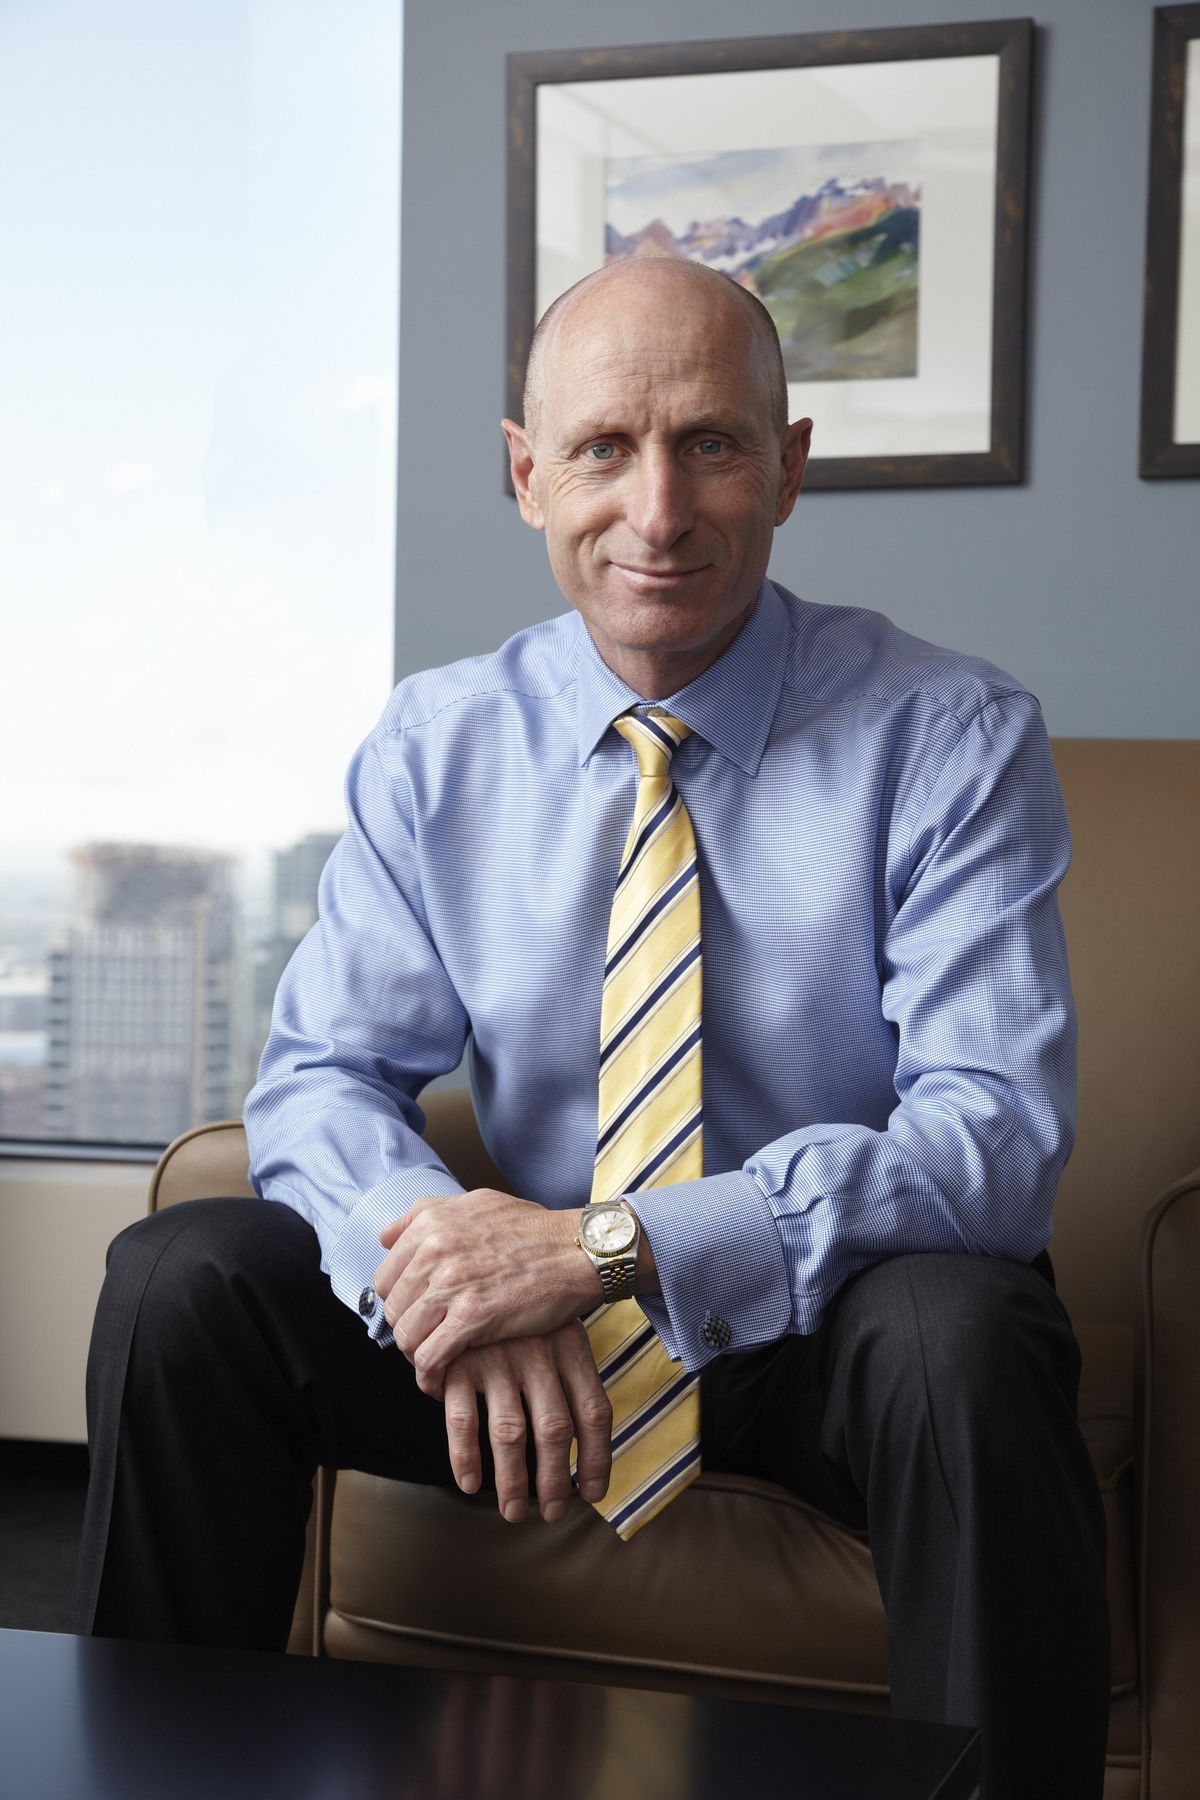 Mayo Schmidt is the chief executive of Hydro One Ltd., which is poise to acquire Avista Corp. in a $5.3 billion cash transaction. The sale is expected to close in 2018. (Courtesy of Hydro One Ltd.)